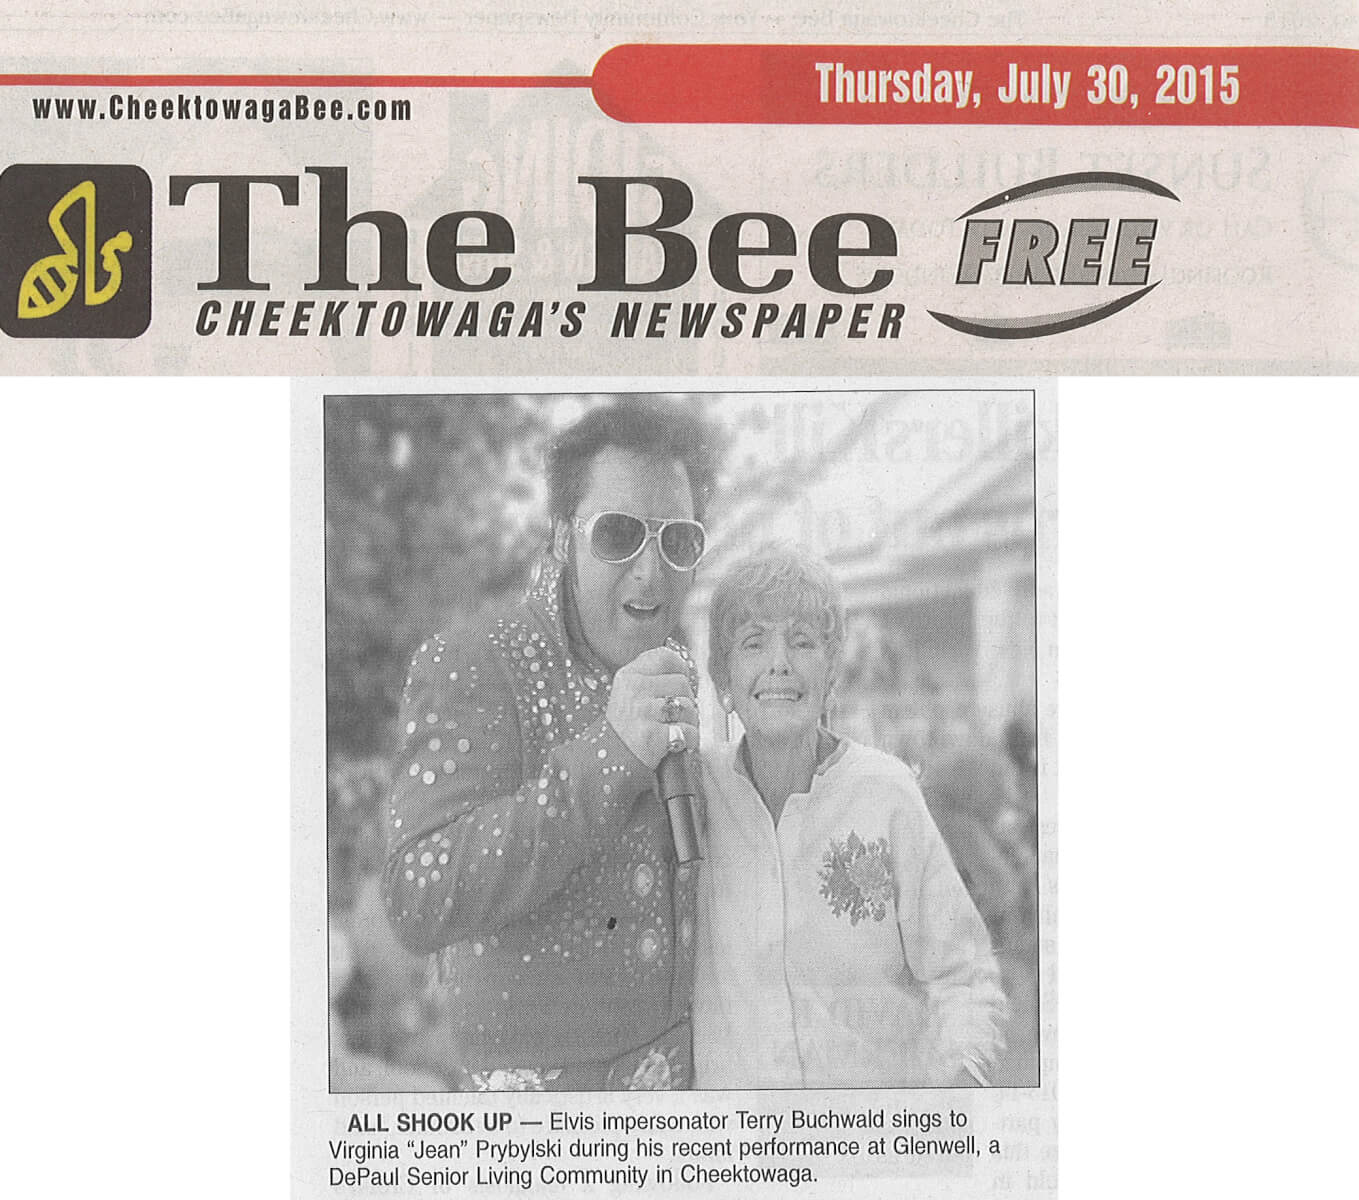 Glenwell gets a visit from Elvis Impersonator Terry Buchwald photo in the Cheektowaga Bee on July 30, 2015